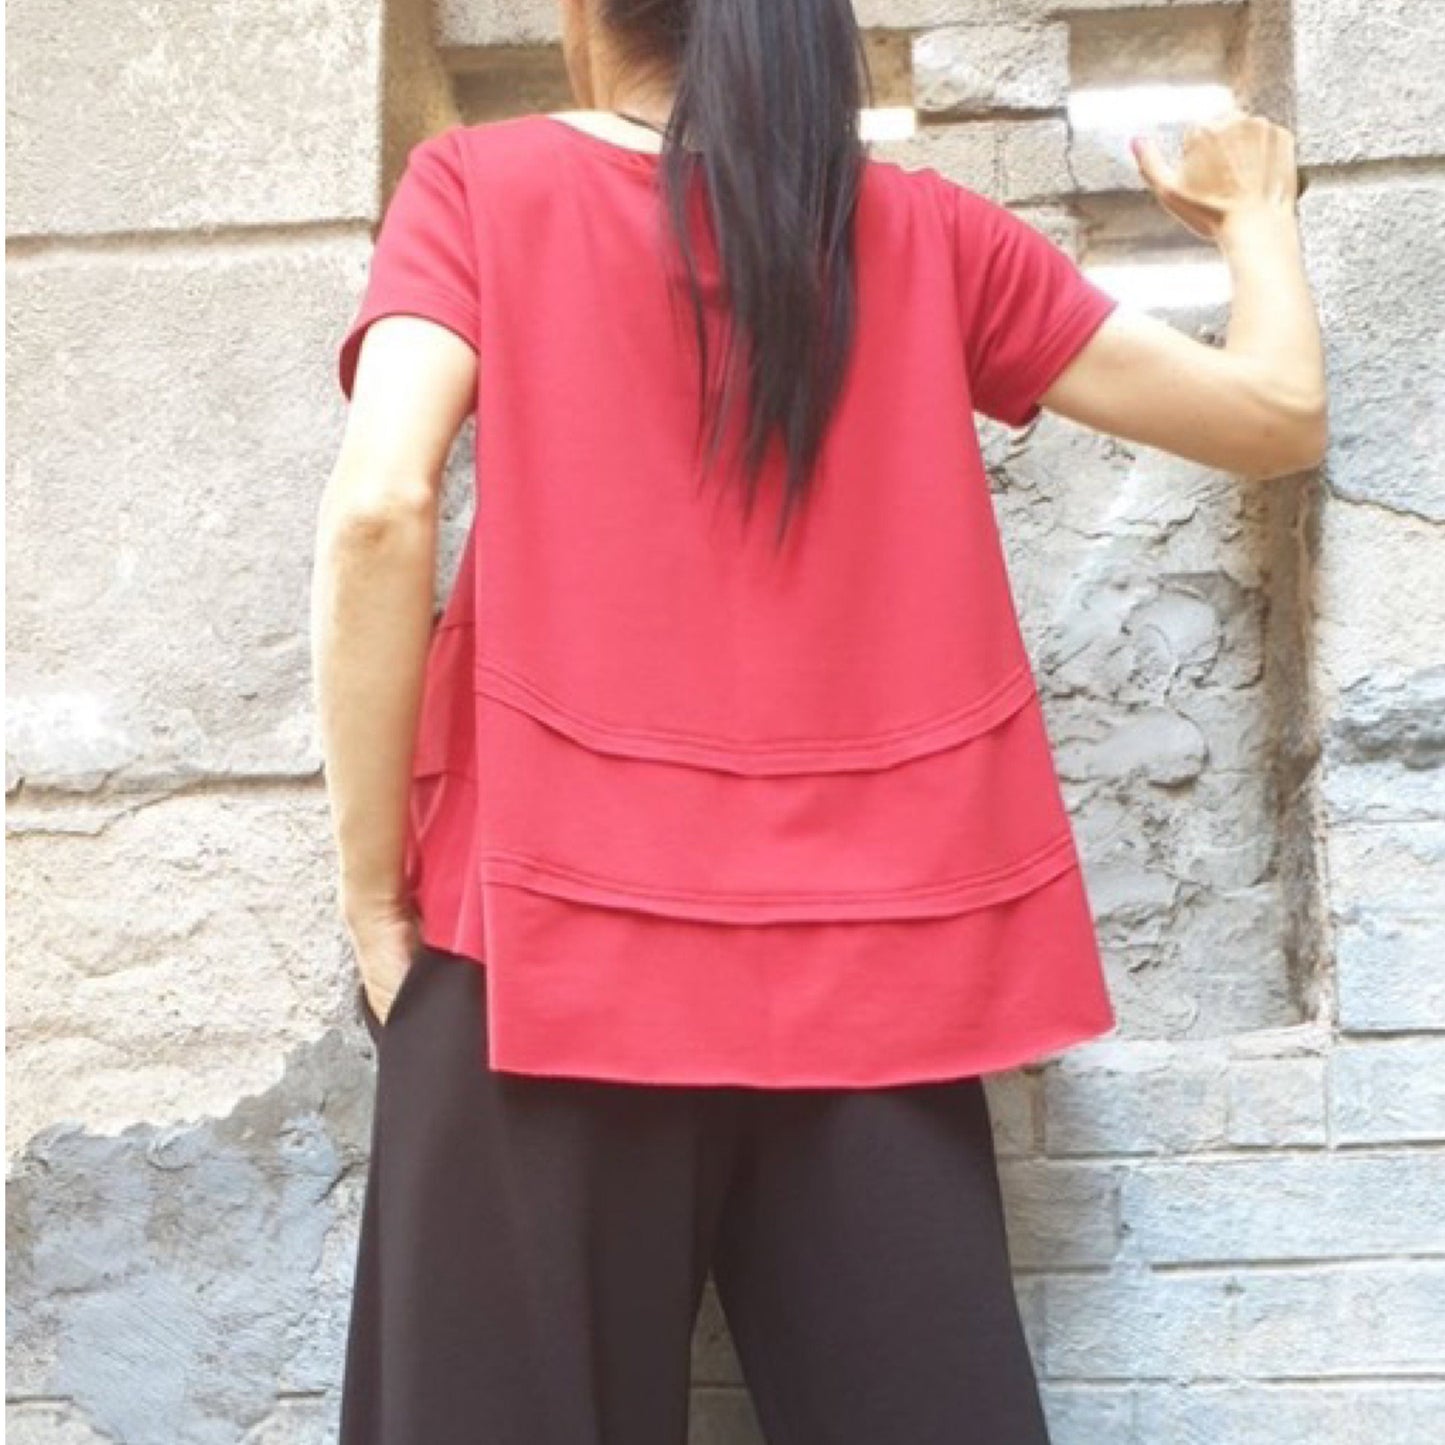 Summer Red Blouse - Handmade clothing from AngelBySilvia - Top Designer Brands 